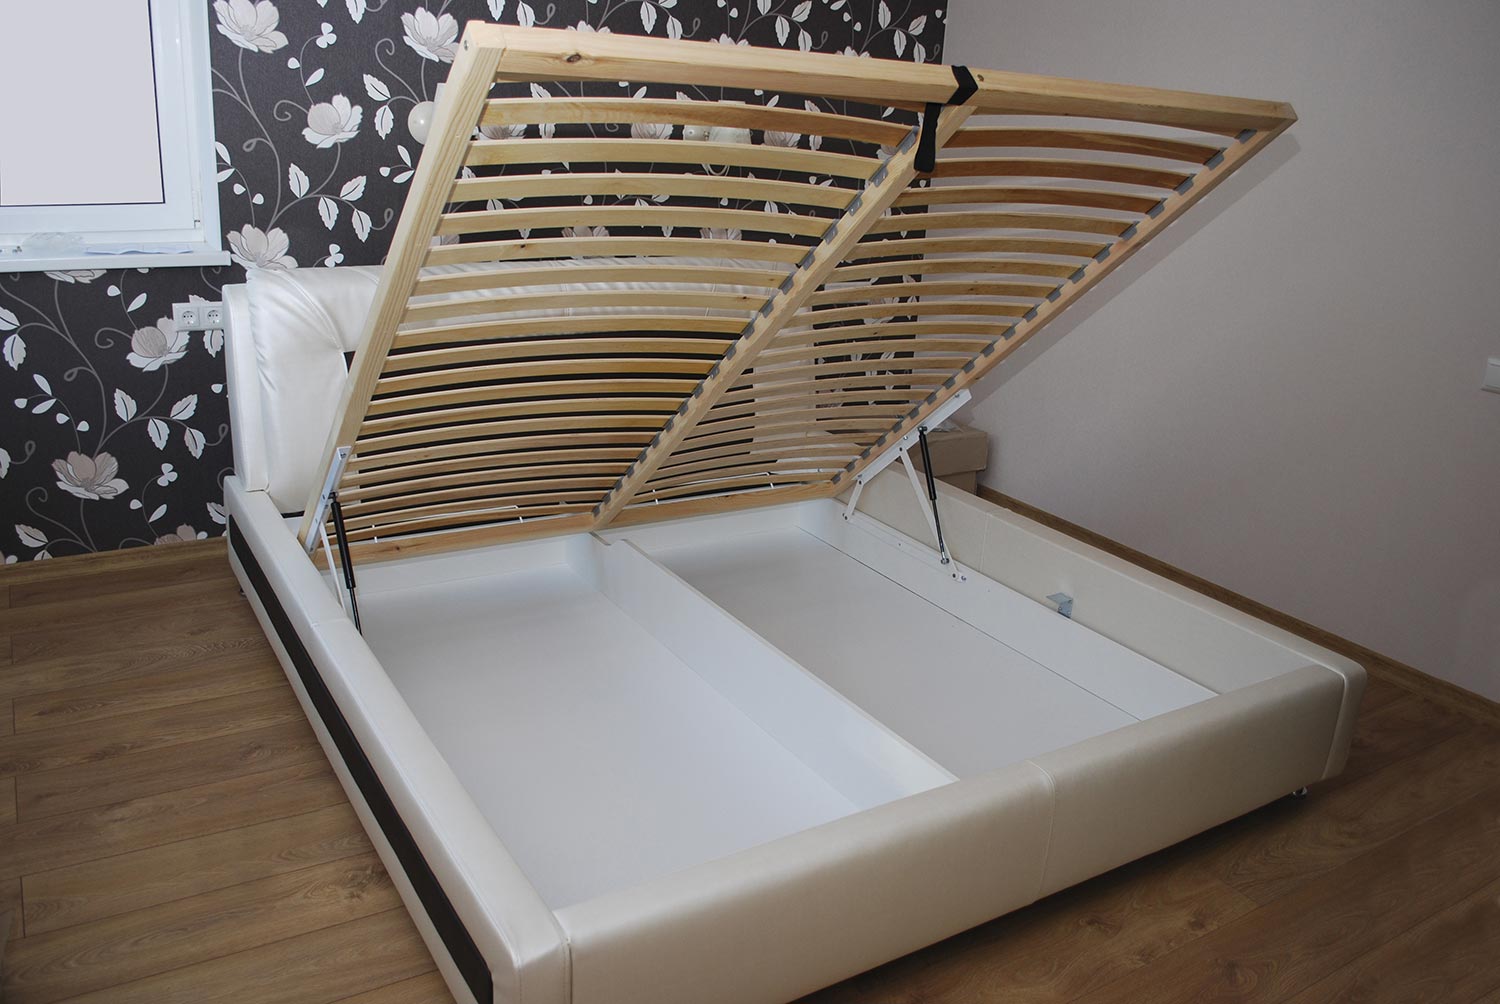 Slats under the mattress for the bed